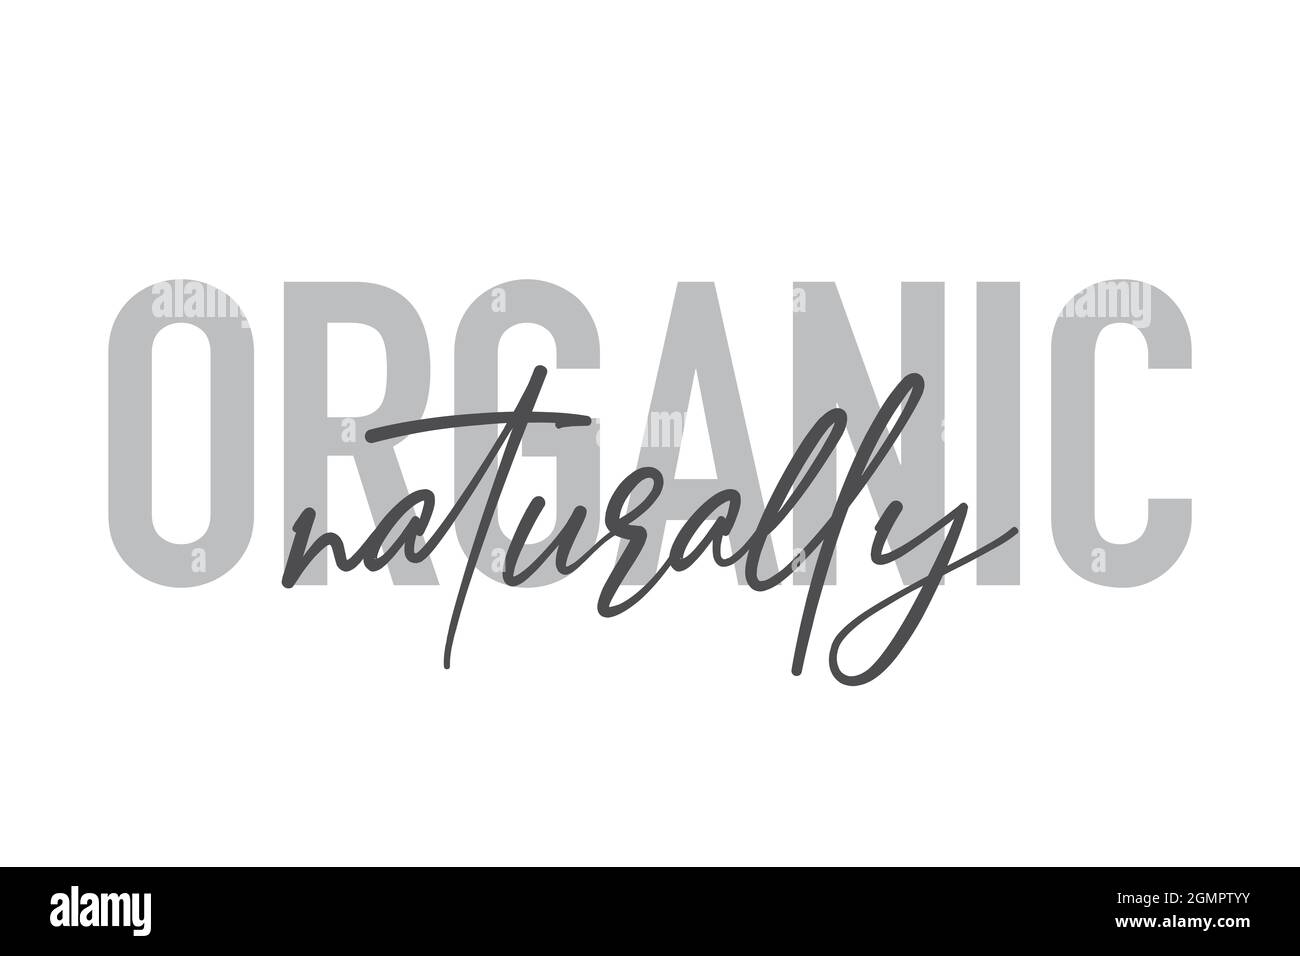 Modern, simple, minimal typographic design of a saying 'Organic Naturally' in tones of grey color. Cool, urban, trendy and playful graphic vector art Stock Photo